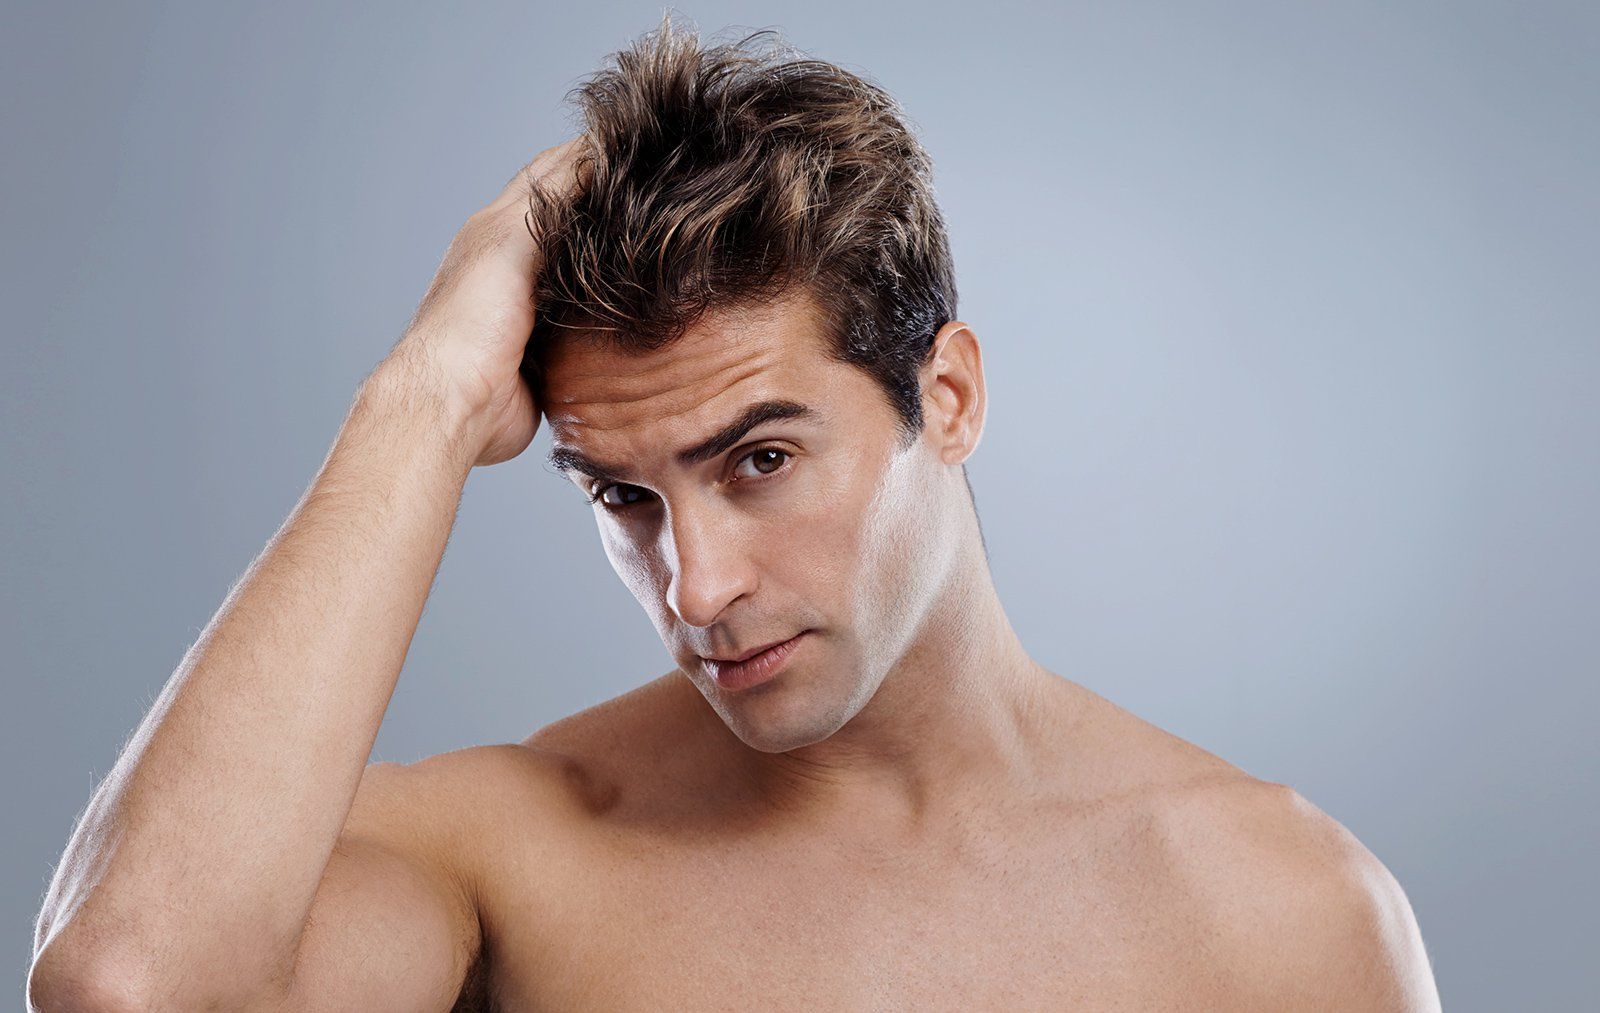 How to Apply Your Hair Product | Men's Health